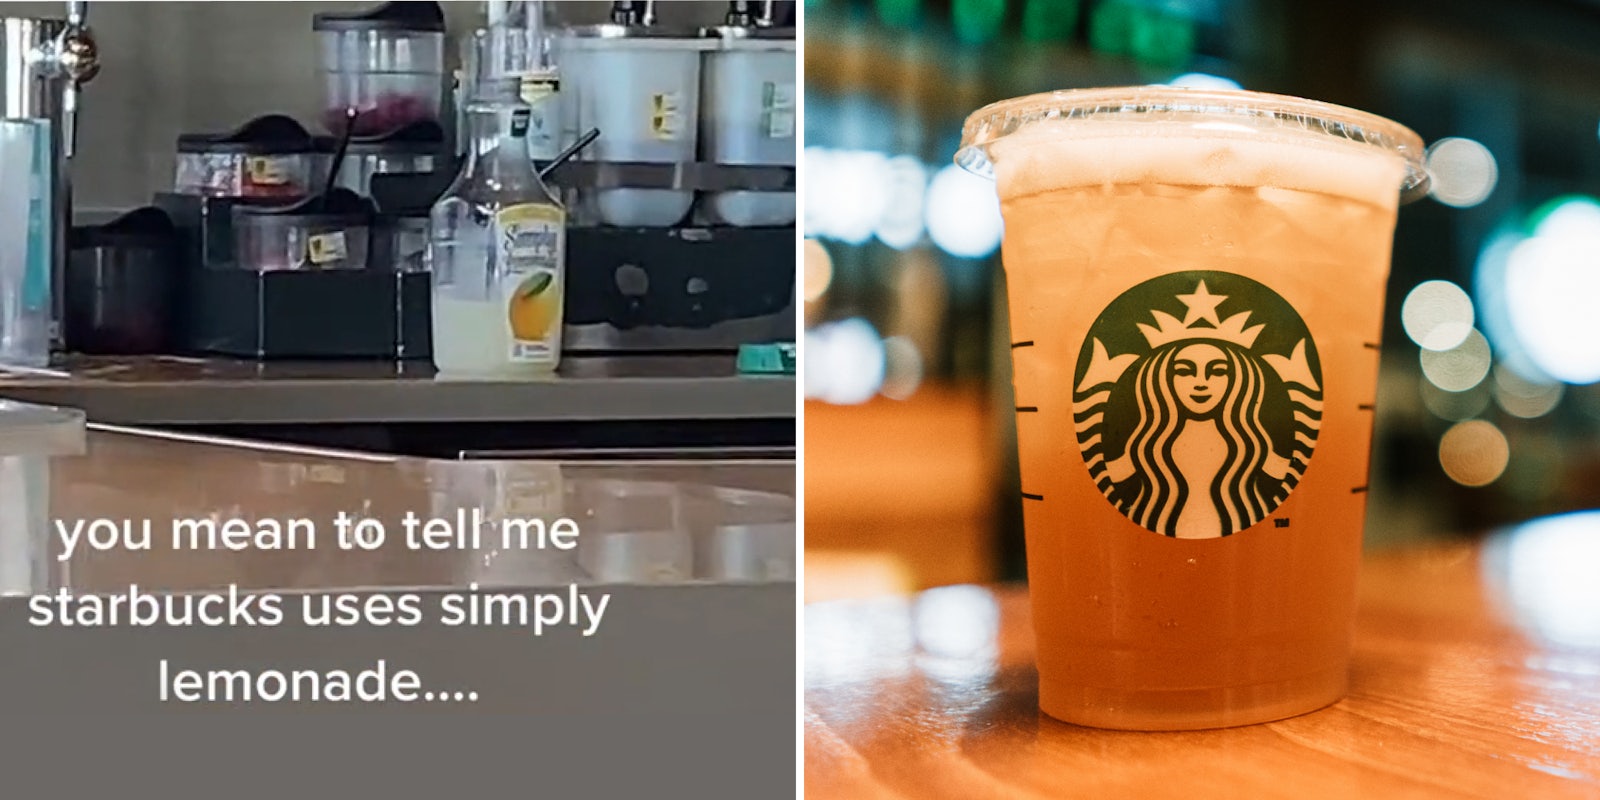 Starbucks counter with bottle of Simply Lemonade caption 'you mean to tell me starbucks uses simply lemonade...' (l) Starbucks lemonade drink on table (r)